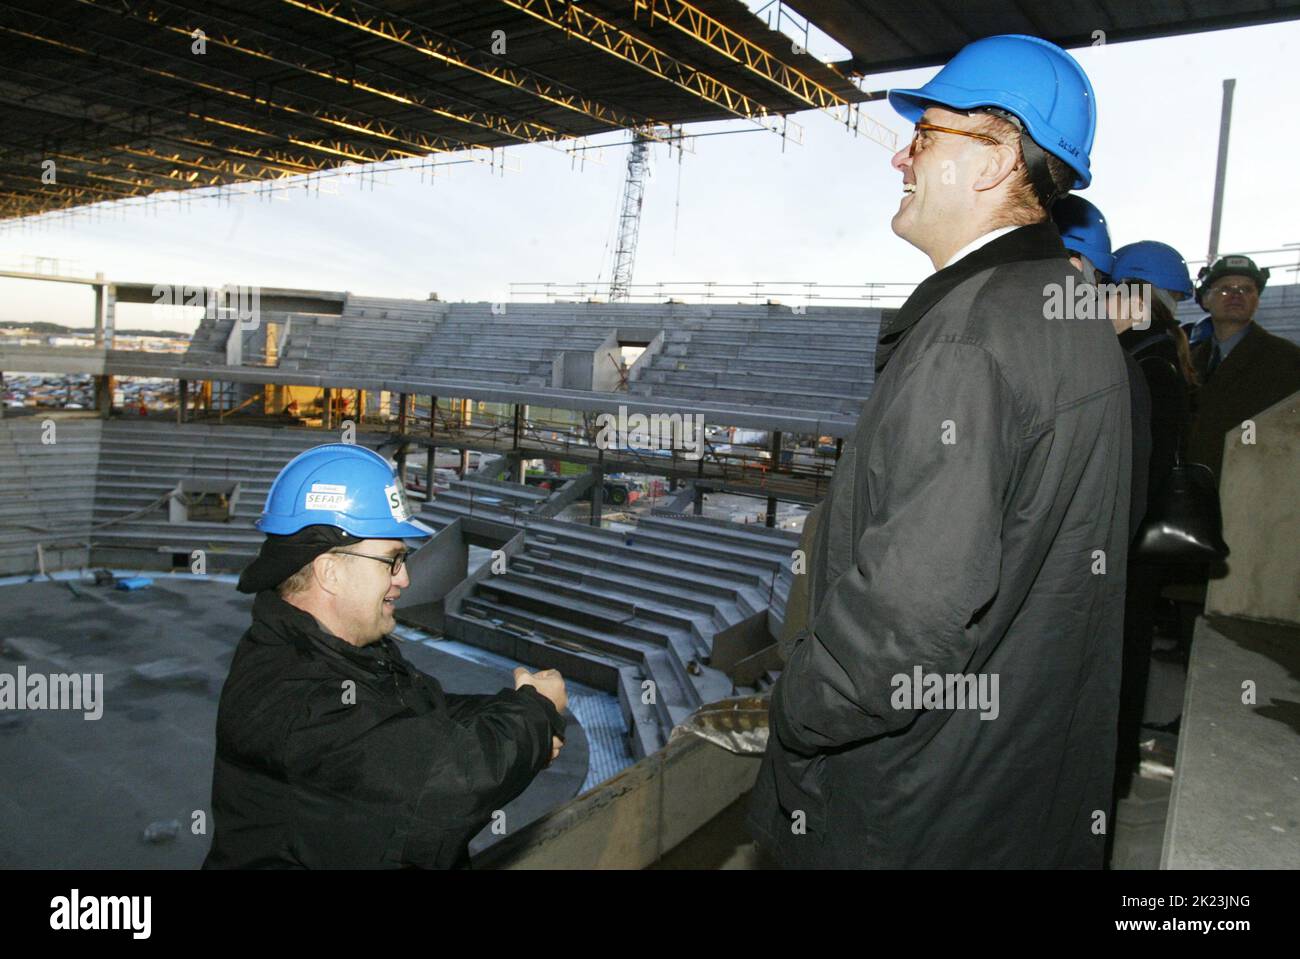 The construction of the new ice hockey arena, Cloetta Center, in Linköping,  Sweden, continues. The Minister for Finance (Swedish: finansminister)  Gunnar Lund (to the right in the picture) visited the construction site